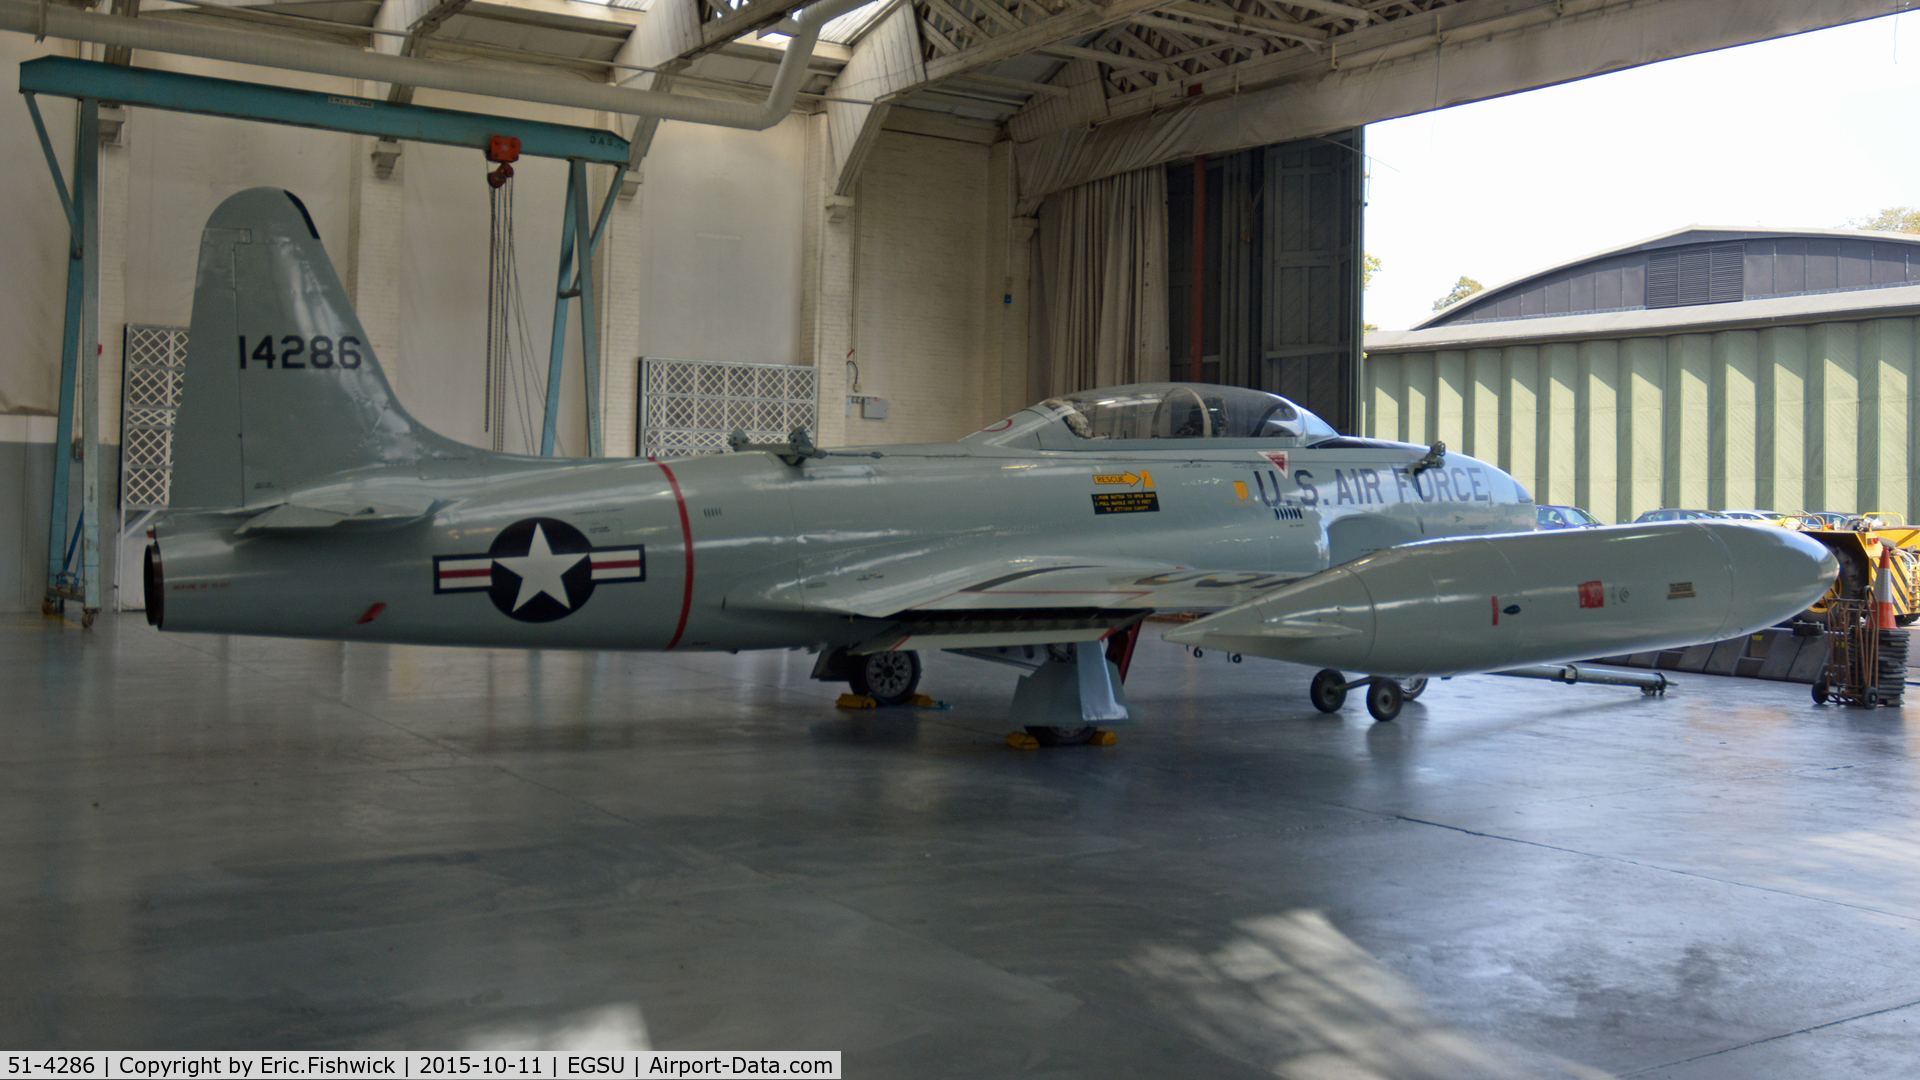 51-4286, 1951 Lockheed T-33A Shooting Star C/N 580-5581, 2. 51-4286 refurbished and ready for the American Air Museum Hanger, at The Imperial War Museum, Duxford, Cambridgeshire.